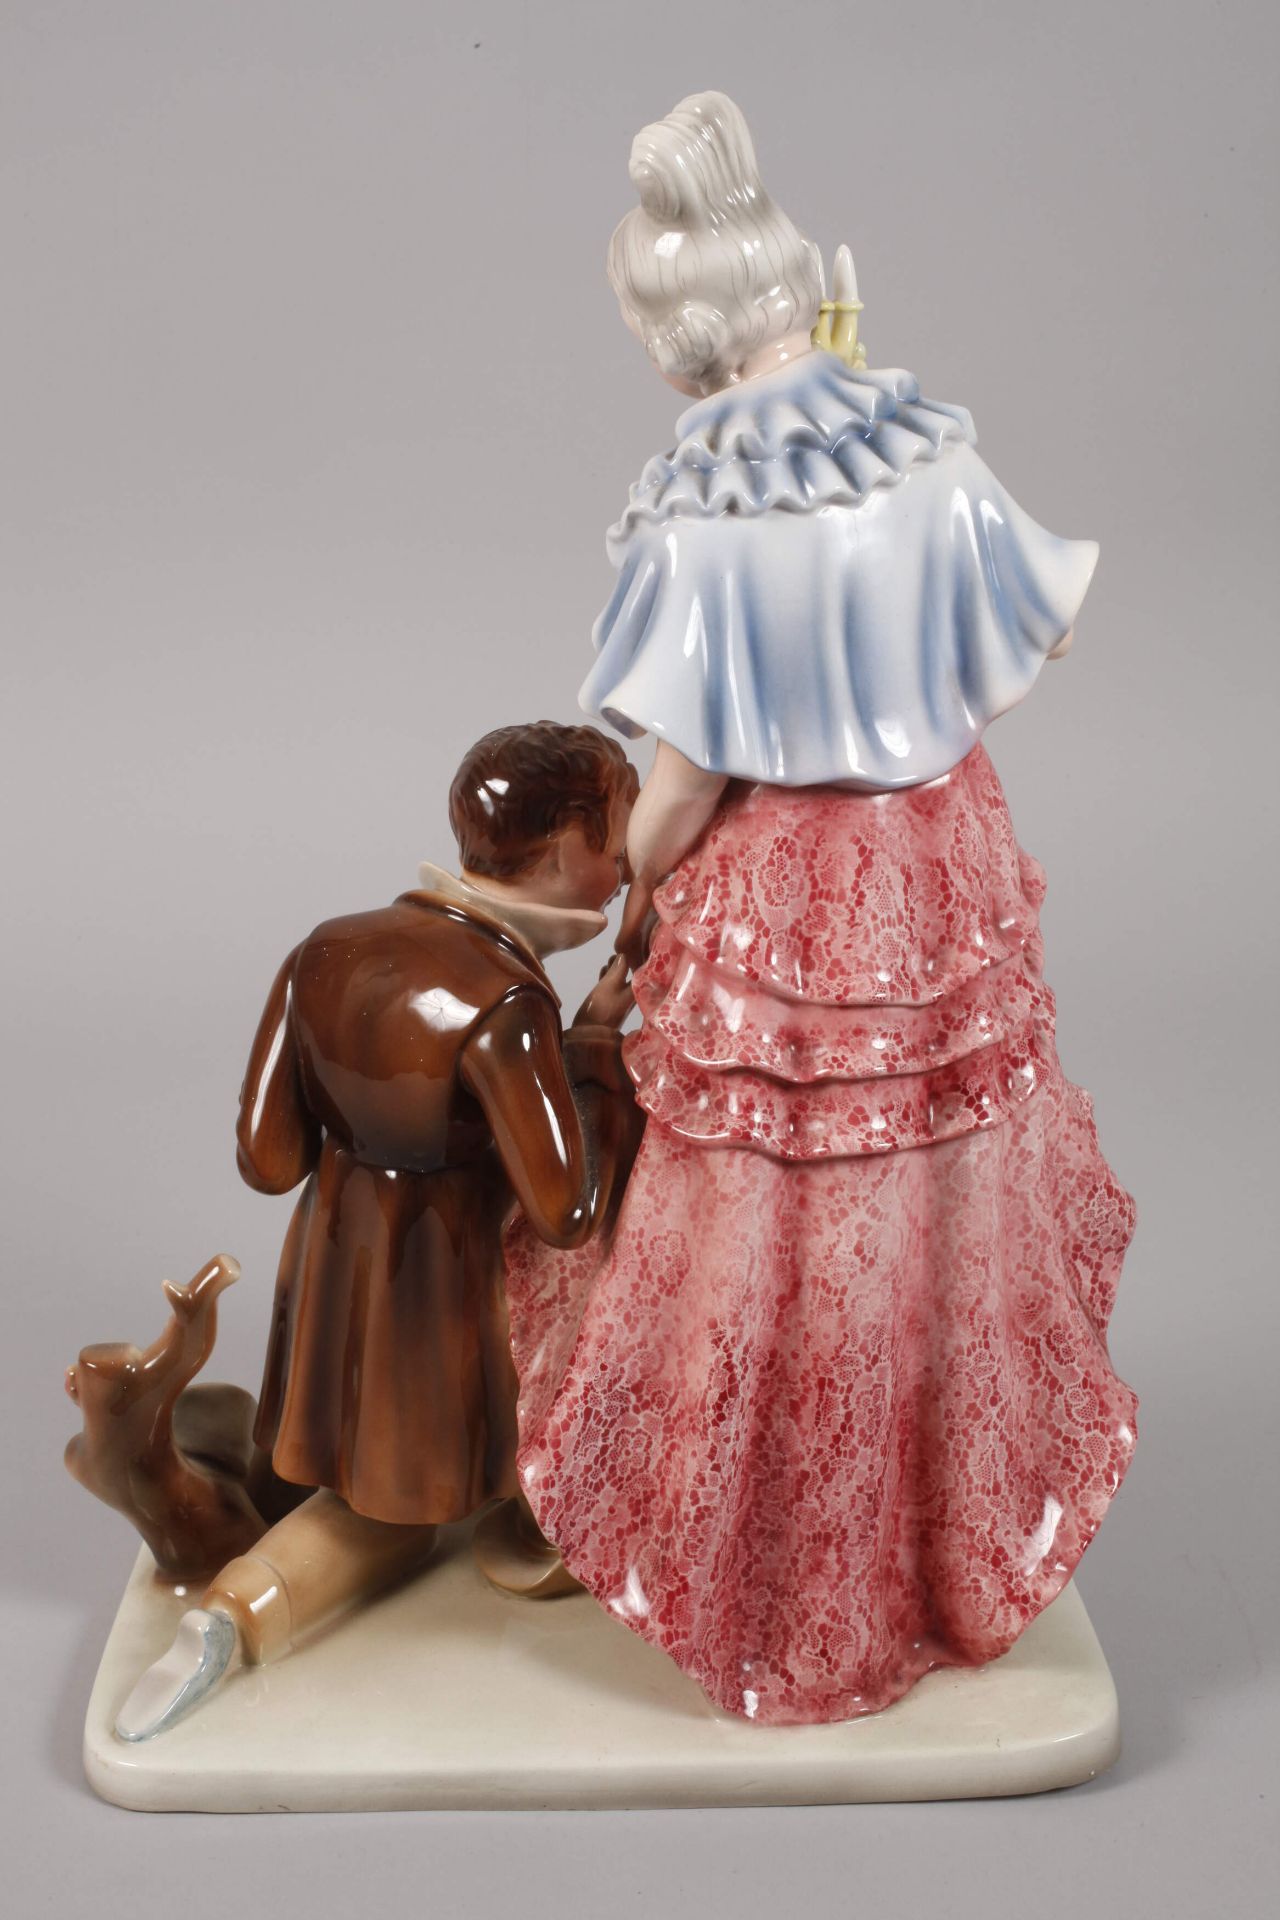 Goldscheid figurine "The kiss on the hand" - Image 4 of 6